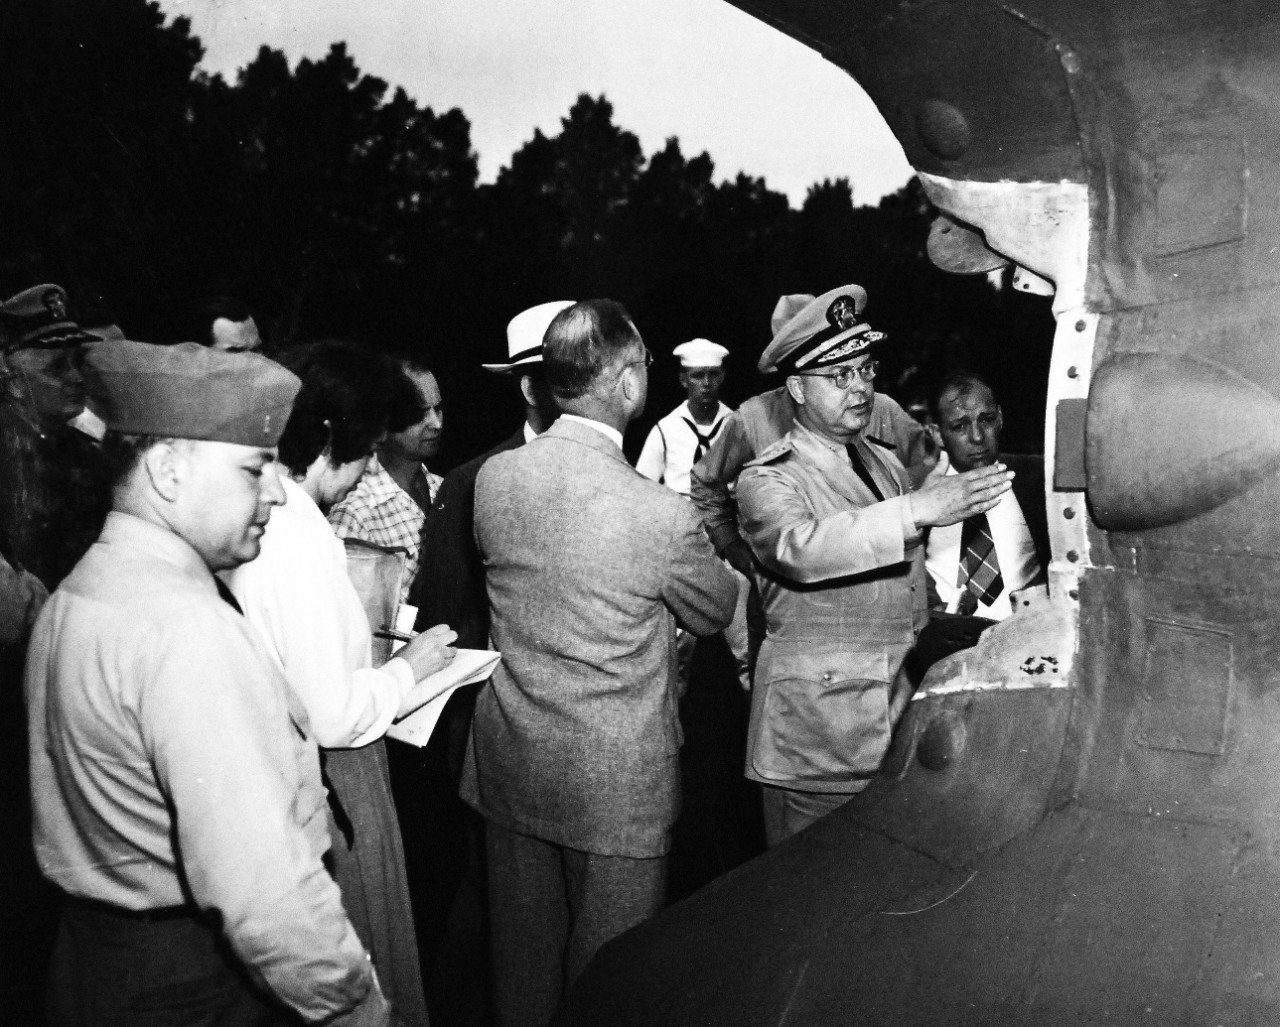 80-G-49885:   German V-2 Rocket being shown by the U.S. Navy in Washington, D.C.   This bomb measured 45’ in length and was captured intact near Nordhausen, Germany.  Rear Admiral Willard A. Kitts explains the details of the tail mechanism which controls the bomb while in flight.   Photograph released July 10, 1945.  Official U.S. Navy Photograph, now in the collections of the National Archives.    